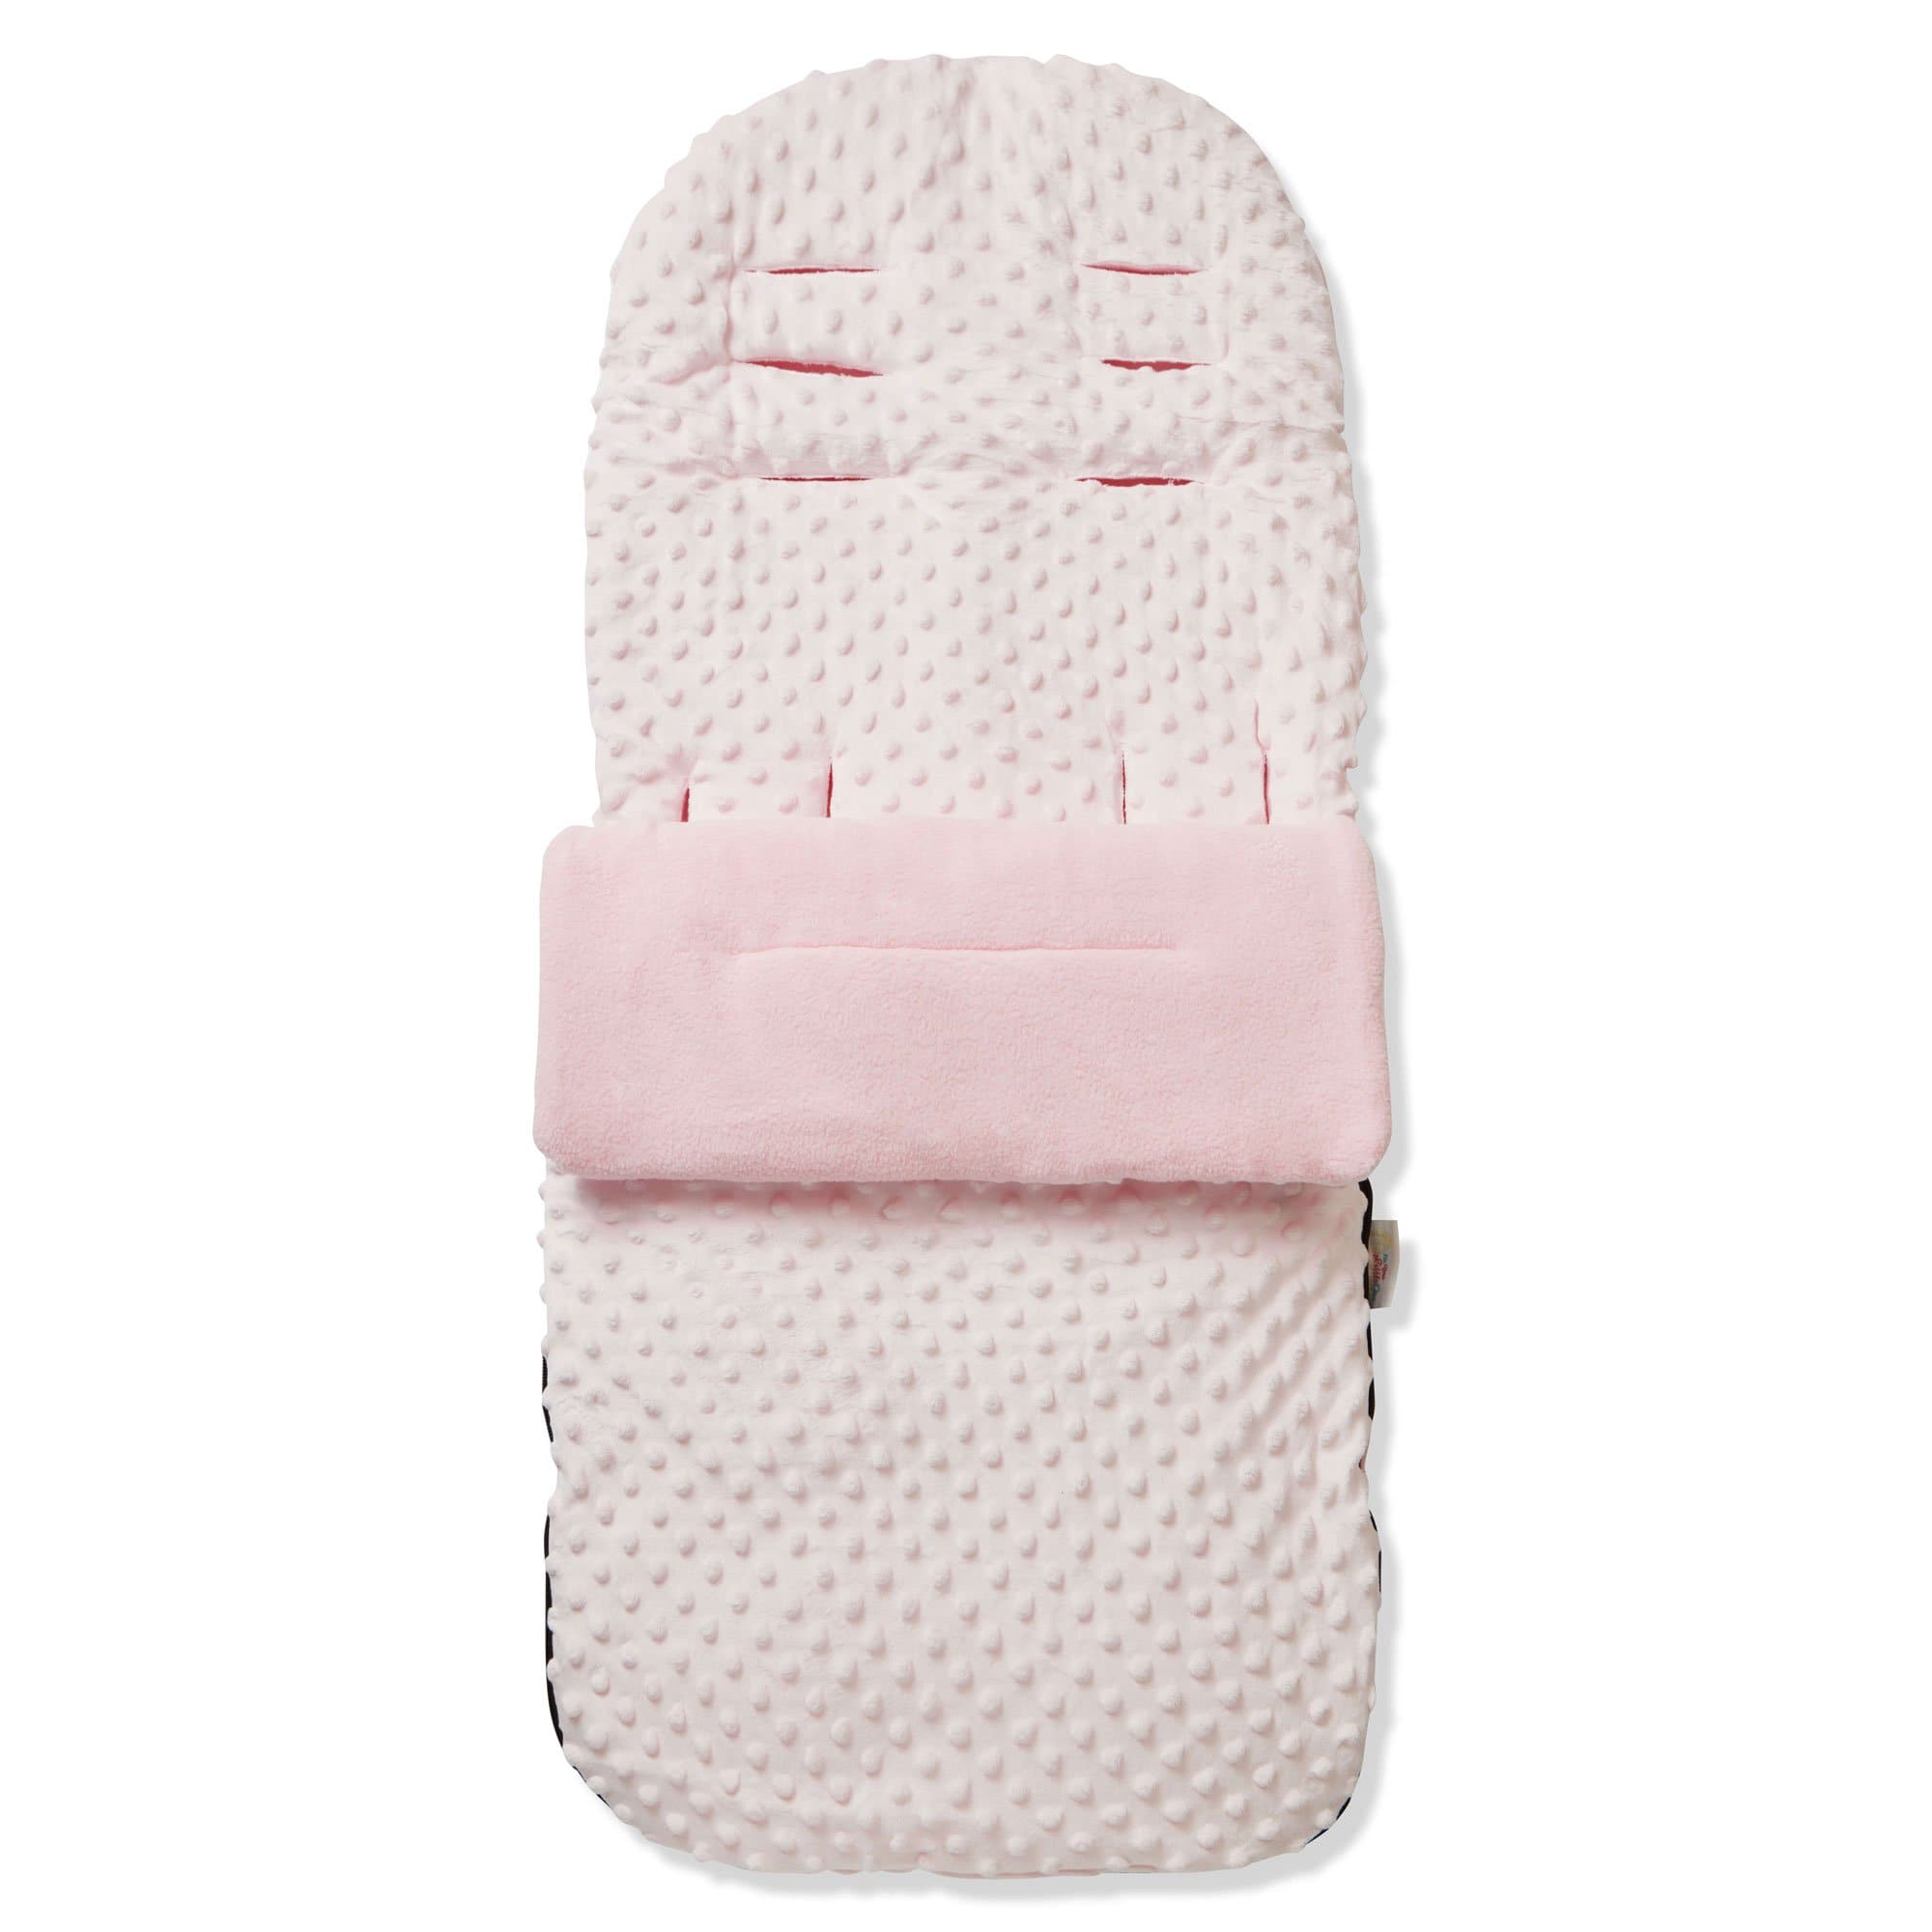 Dimple Footmuff / Cosy Toes Compatible with Little Shield - For Your Little One